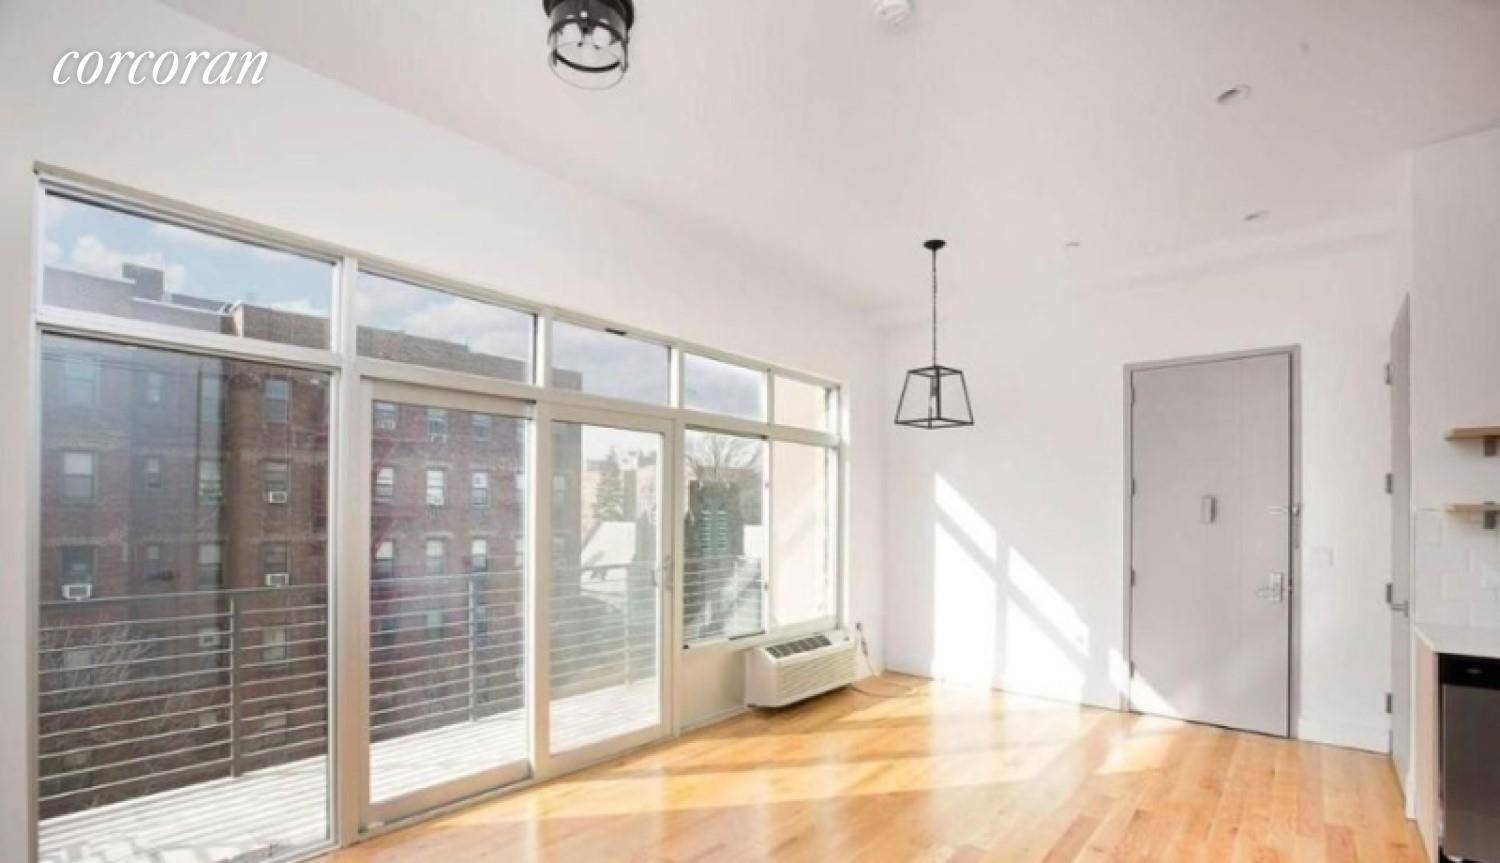 Presenting 1967 Bedford Avenue, a chic elevator building with modern renovations, stainless steel appliances, stone counter tops as well as a dishwasher and private balcony.